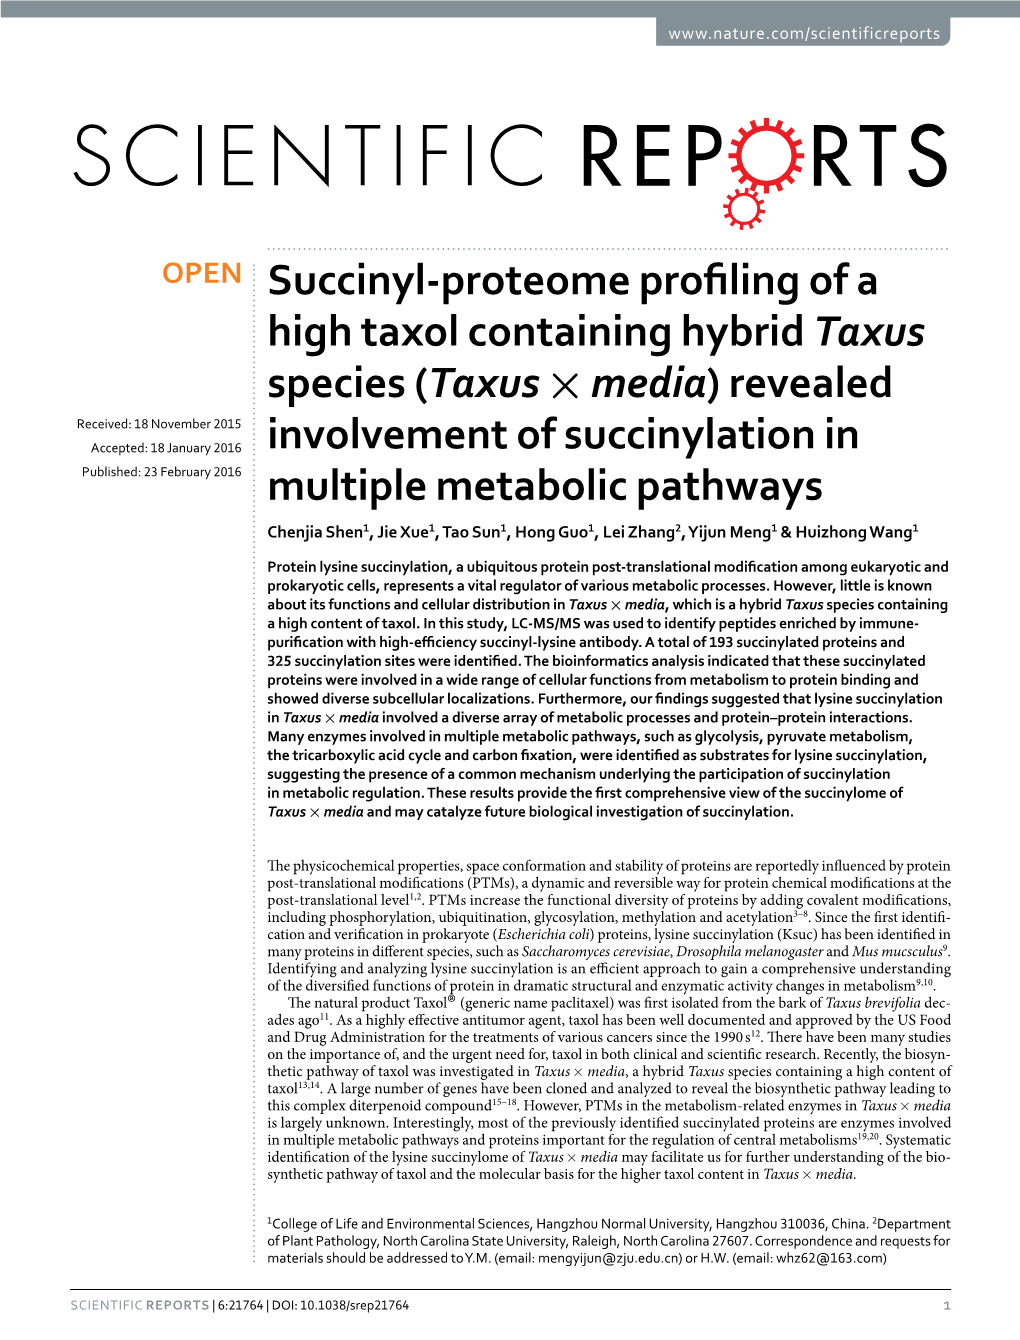 Succinyl-Proteome Profiling of a High Taxol Containing Hybrid Taxus Species